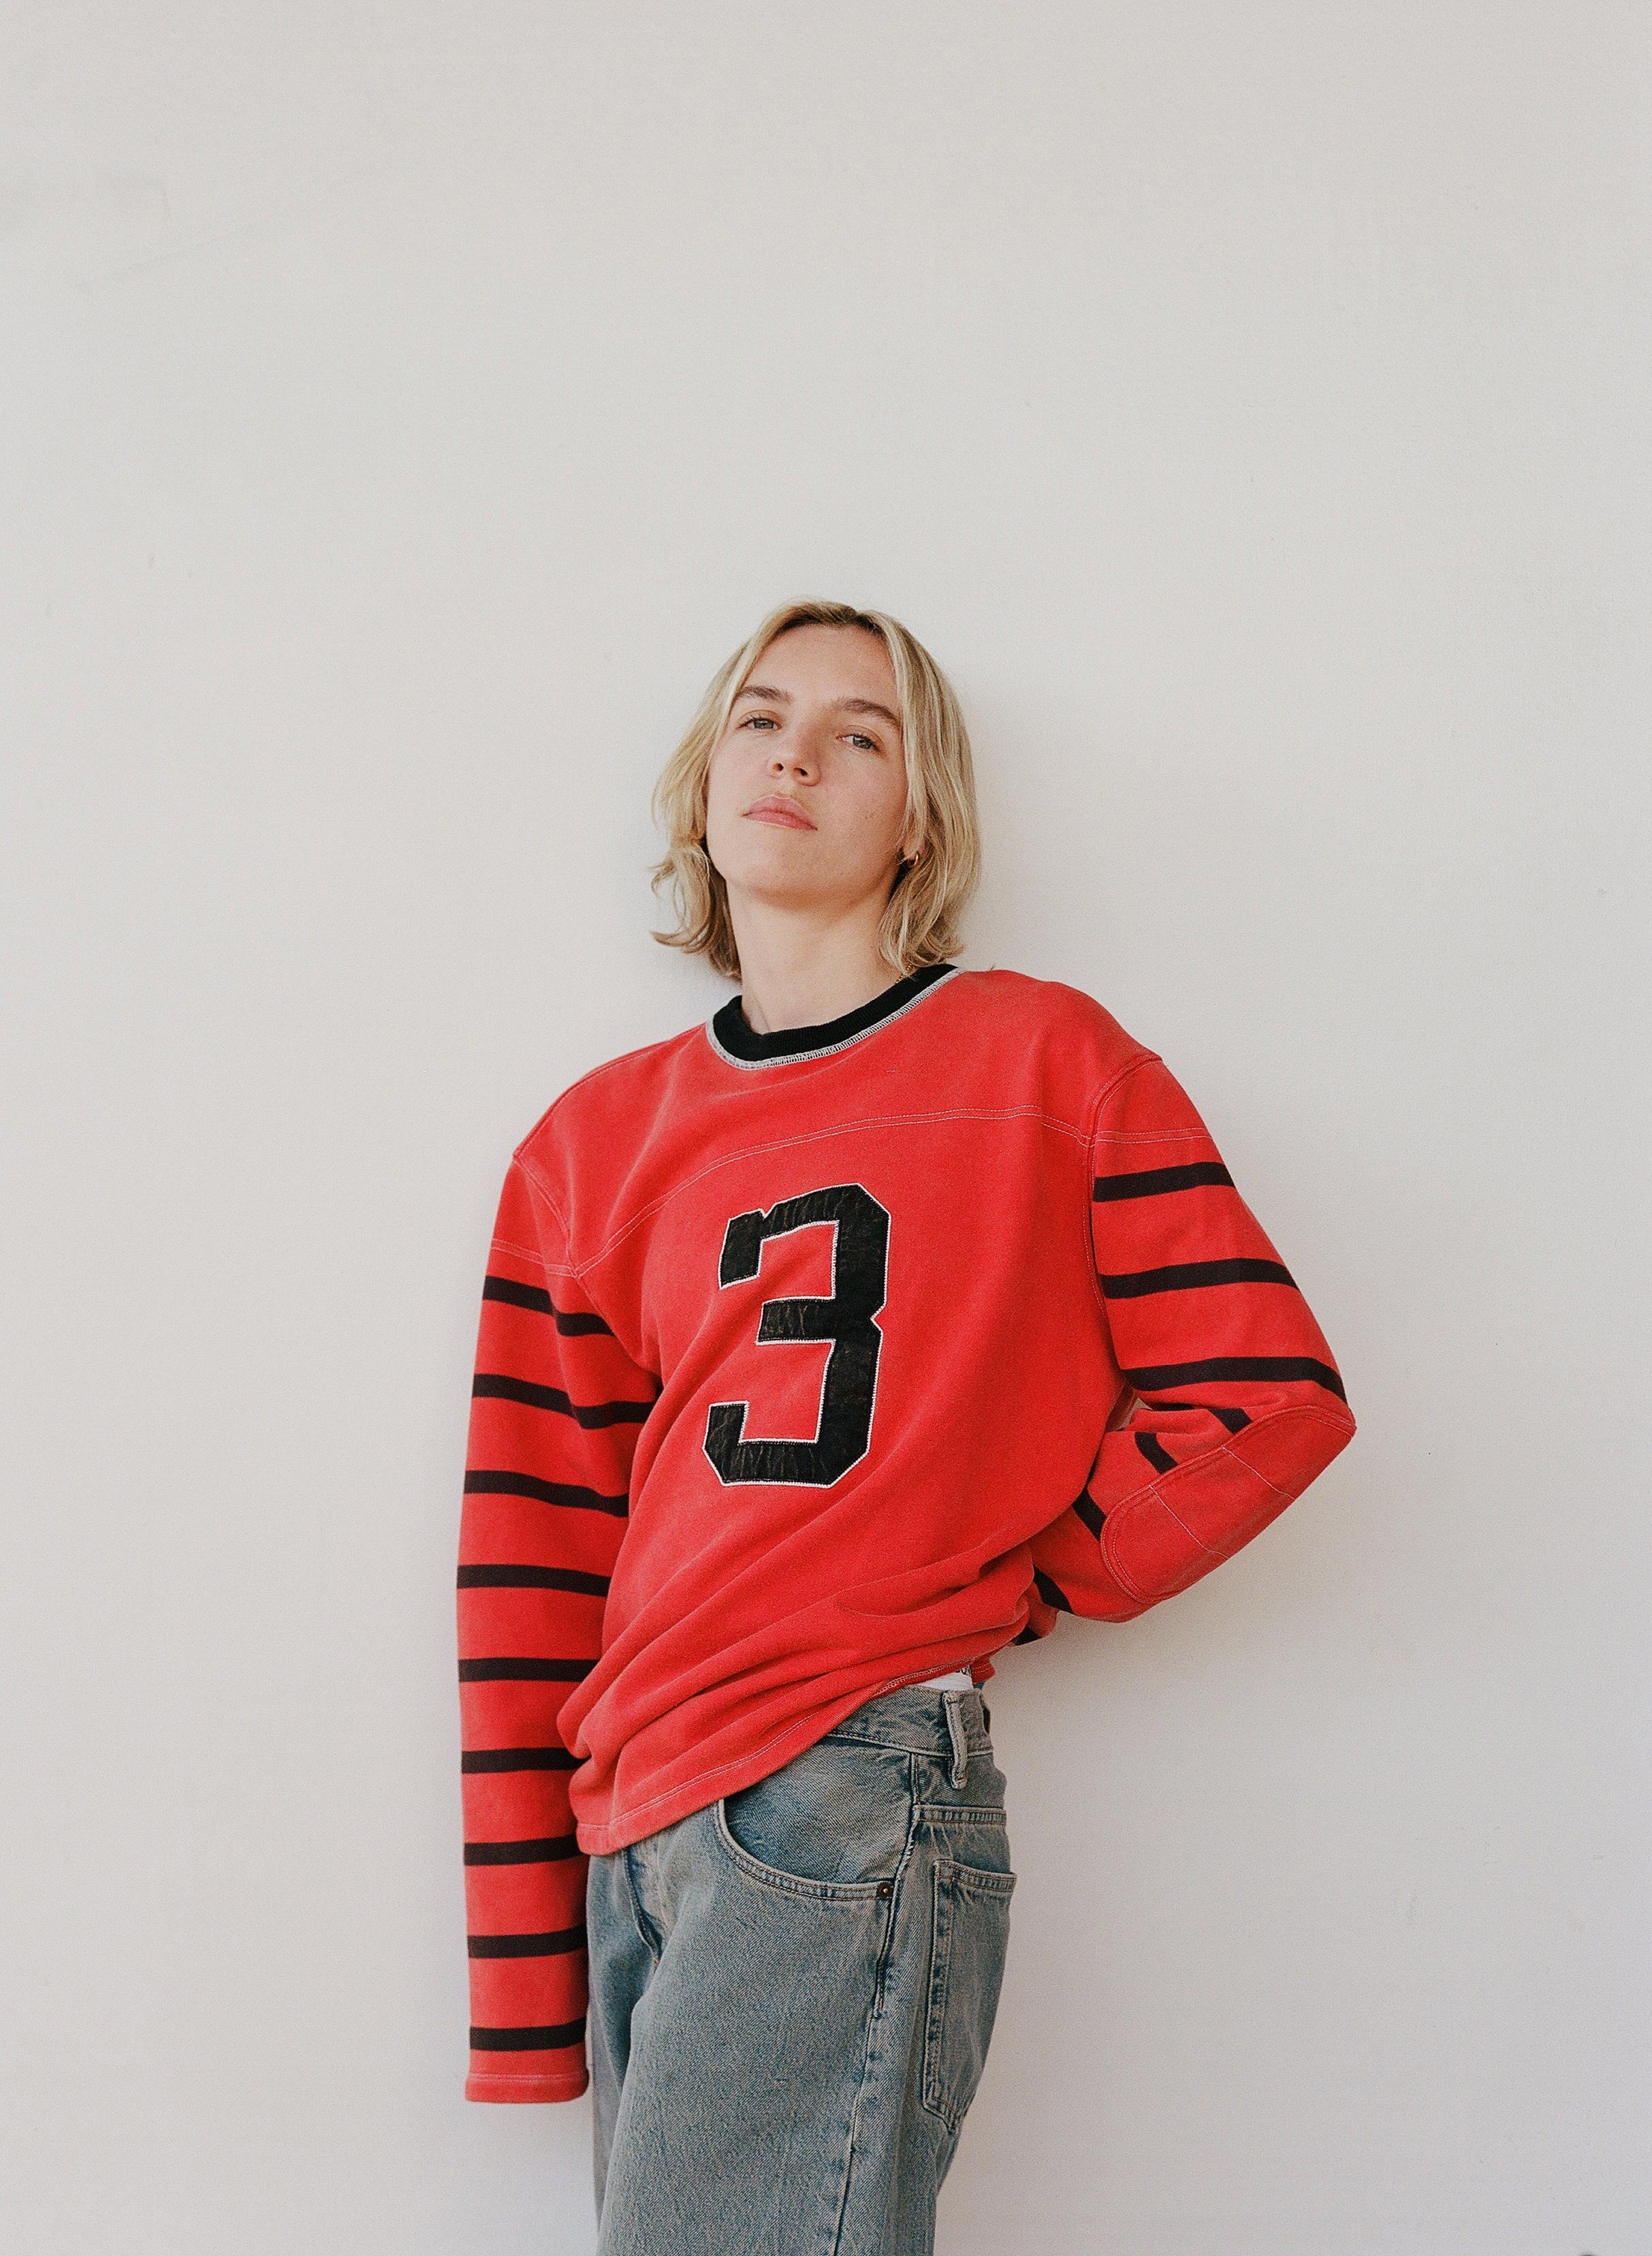 The Japanese House pre-sale password for event tickets in New York, NY (The Rooftop at Pier 17)